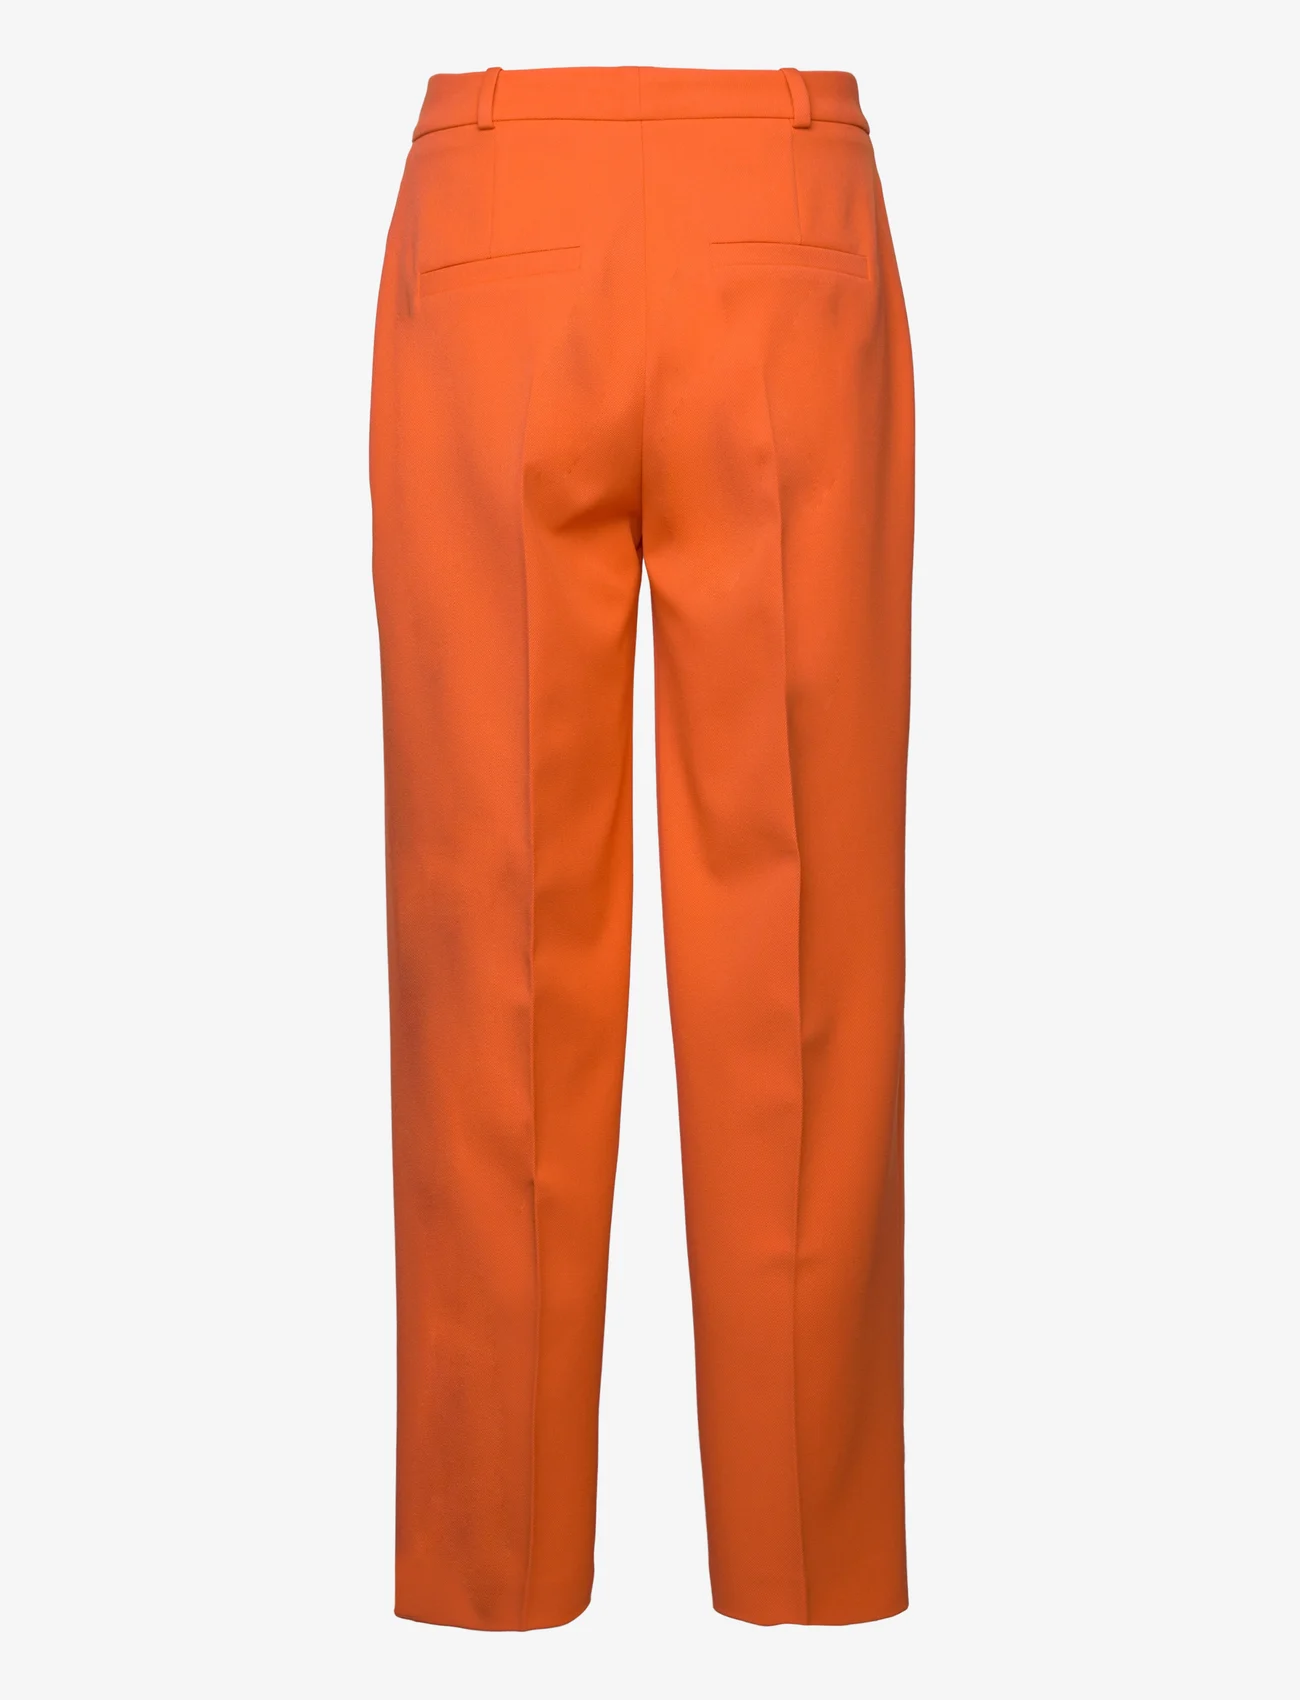 HUGO - Hanifa - tailored trousers - bright red - 1